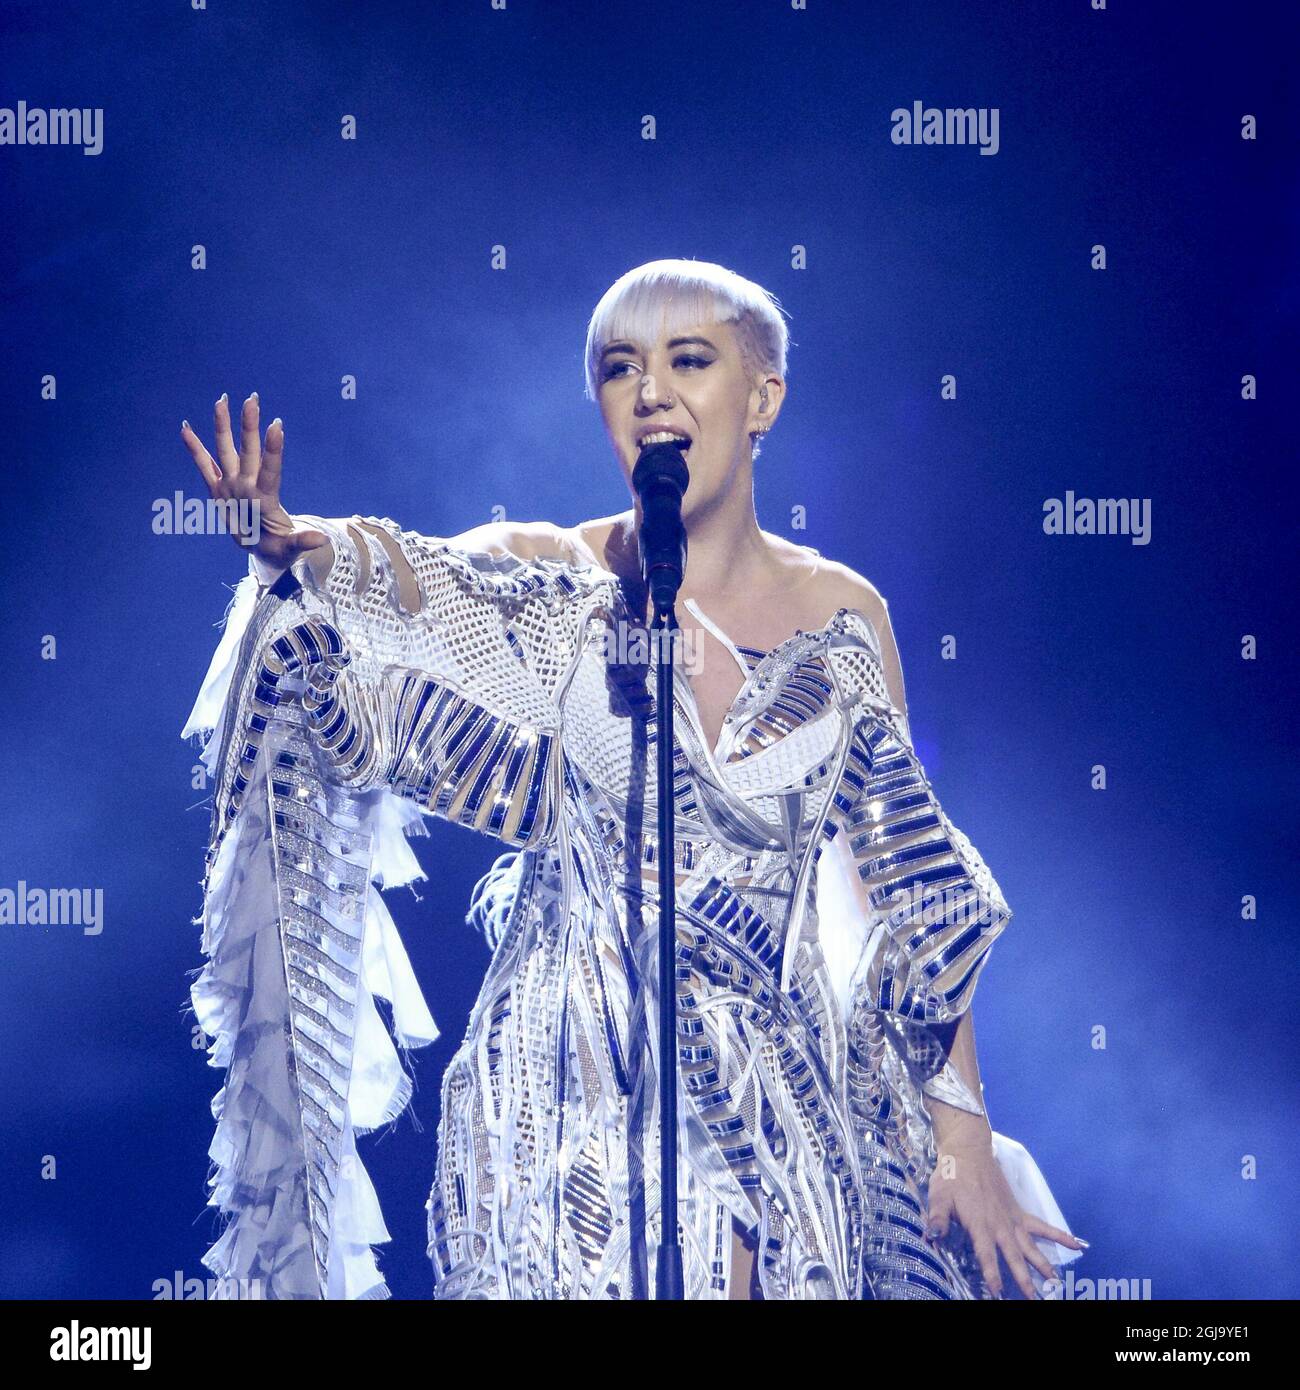 STOCKHOLM 2016-05-10 Croatia's Nina KraljiAÂ‡ performs with the song 'Lighthouse' during the Eurovision Song Contest 2016 semi-final 1 at the Ericsson Globe Arena in Stockholm, Sweden, May 10, 2016. Photo: Maja Suslin / TT / Kod 10300 ** SWEDEN OUT **  Stock Photo